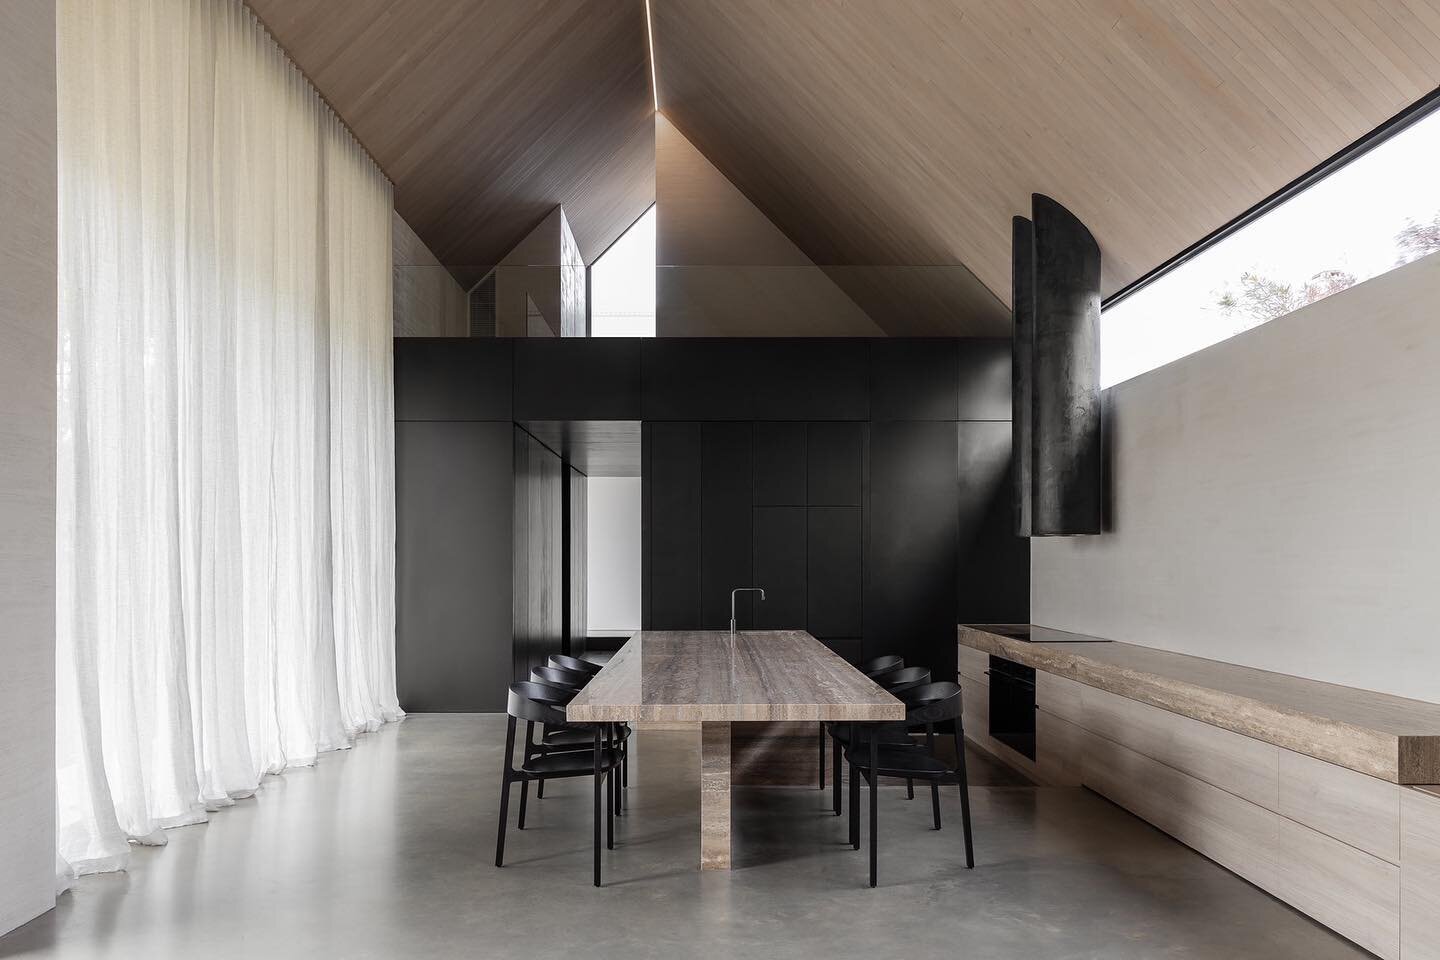 The open expansive kitchen and dining area at The Barwon Heads House speaks through a sense of calmness with its open meditative space. 

Venetian plastering throughout and Custom Rangehood finished by @carlierandco_ Architect @adamkanearchitects Pho